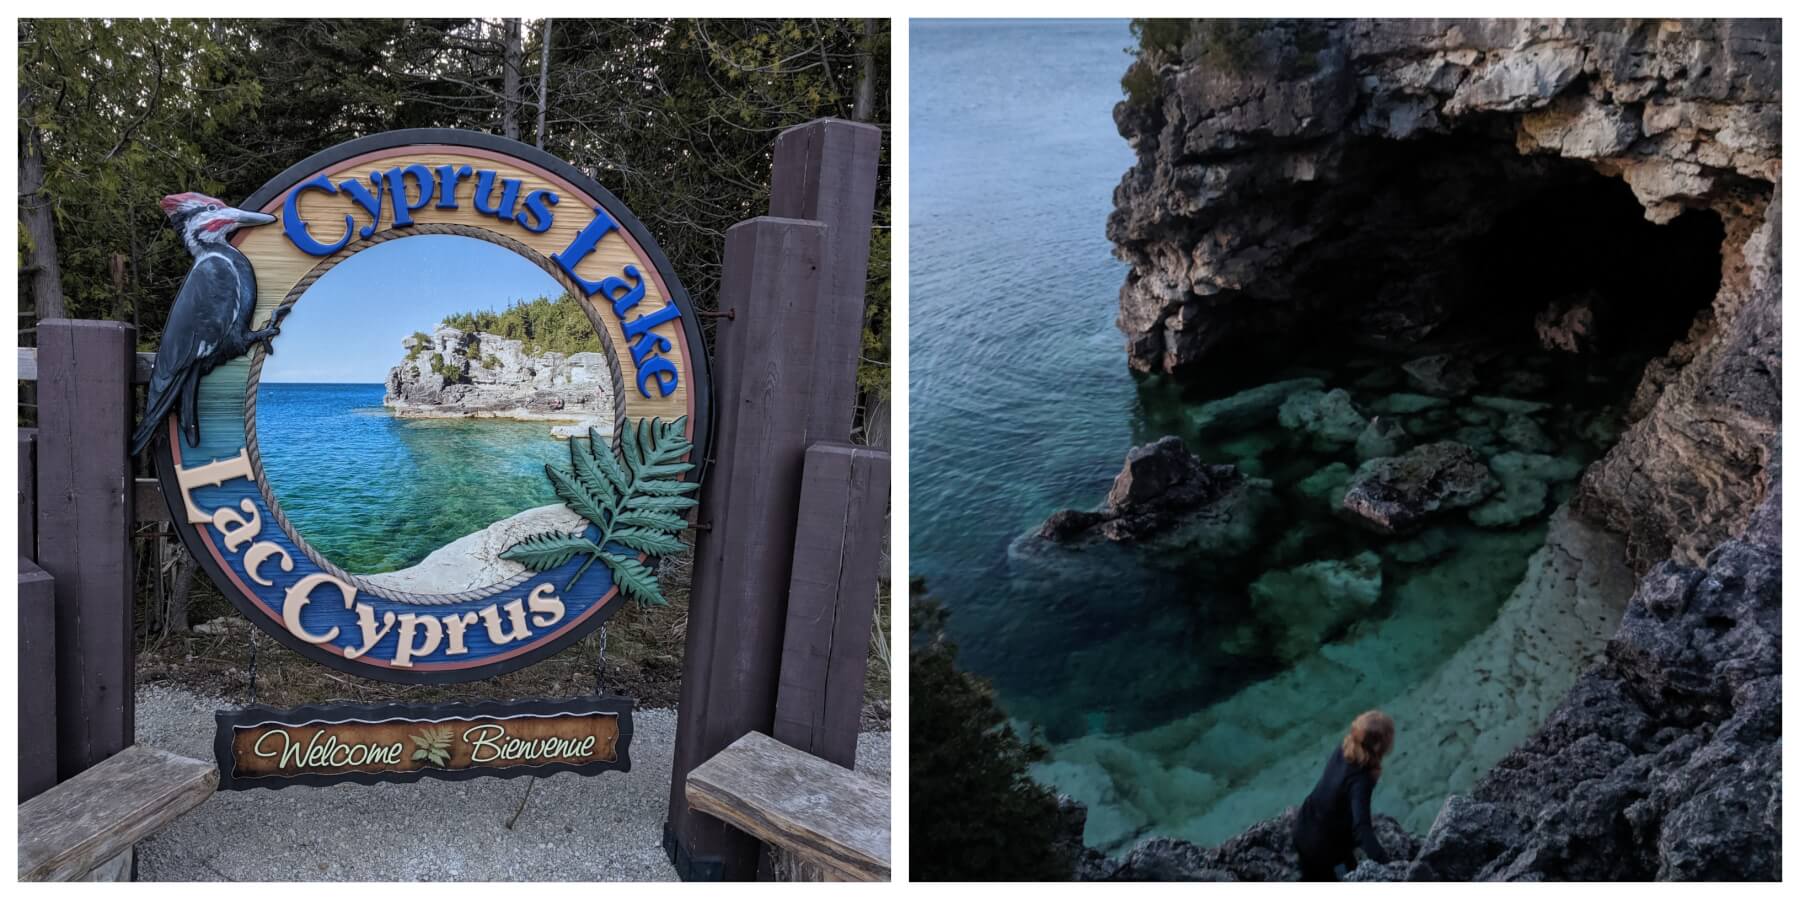 A girl climbing down in the grotto of Lake Cyprus and a photo of the Lake Cyprus sign.